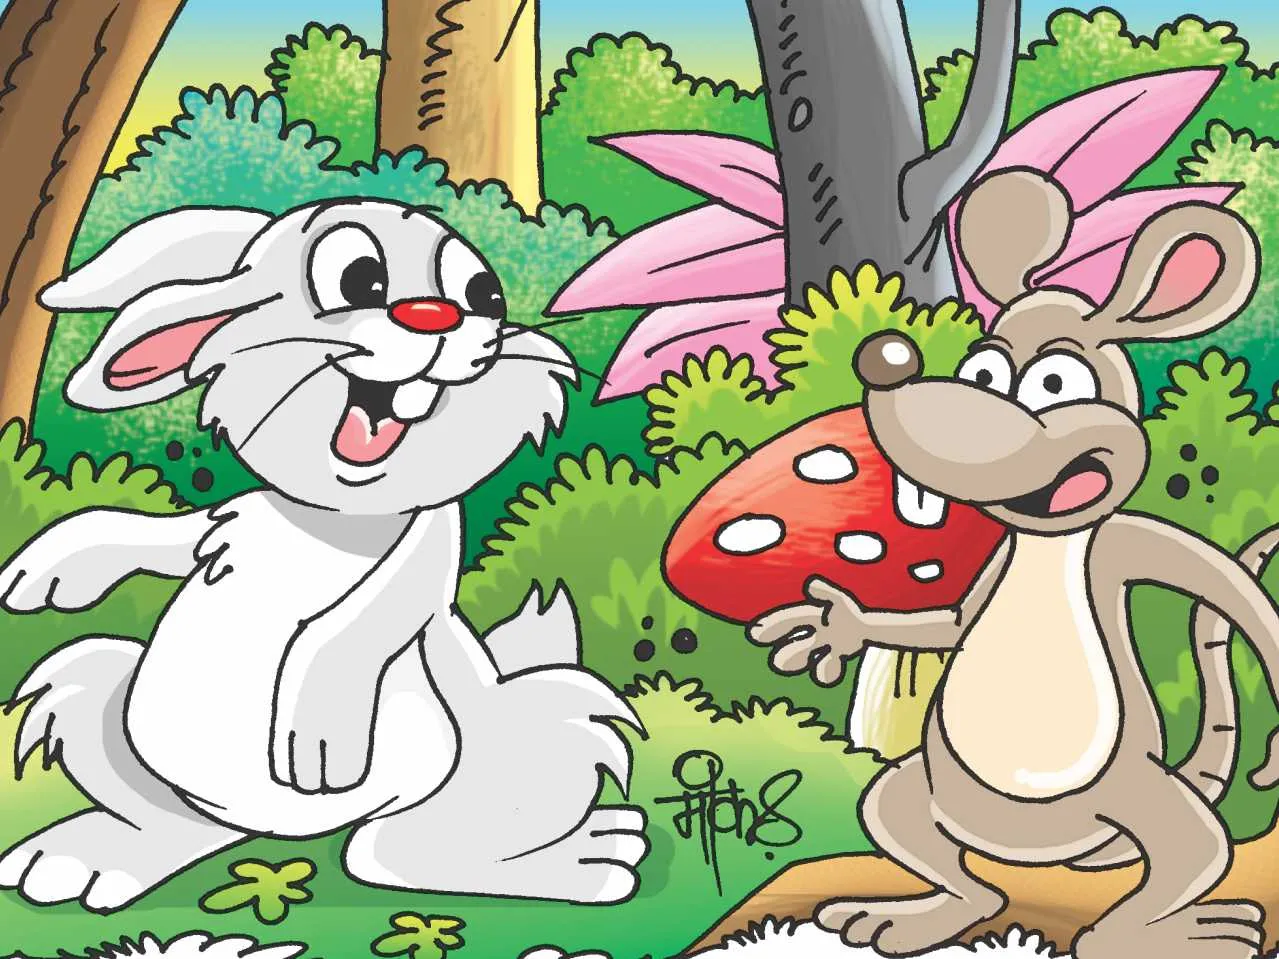 Rabbit and mouse cartoon image